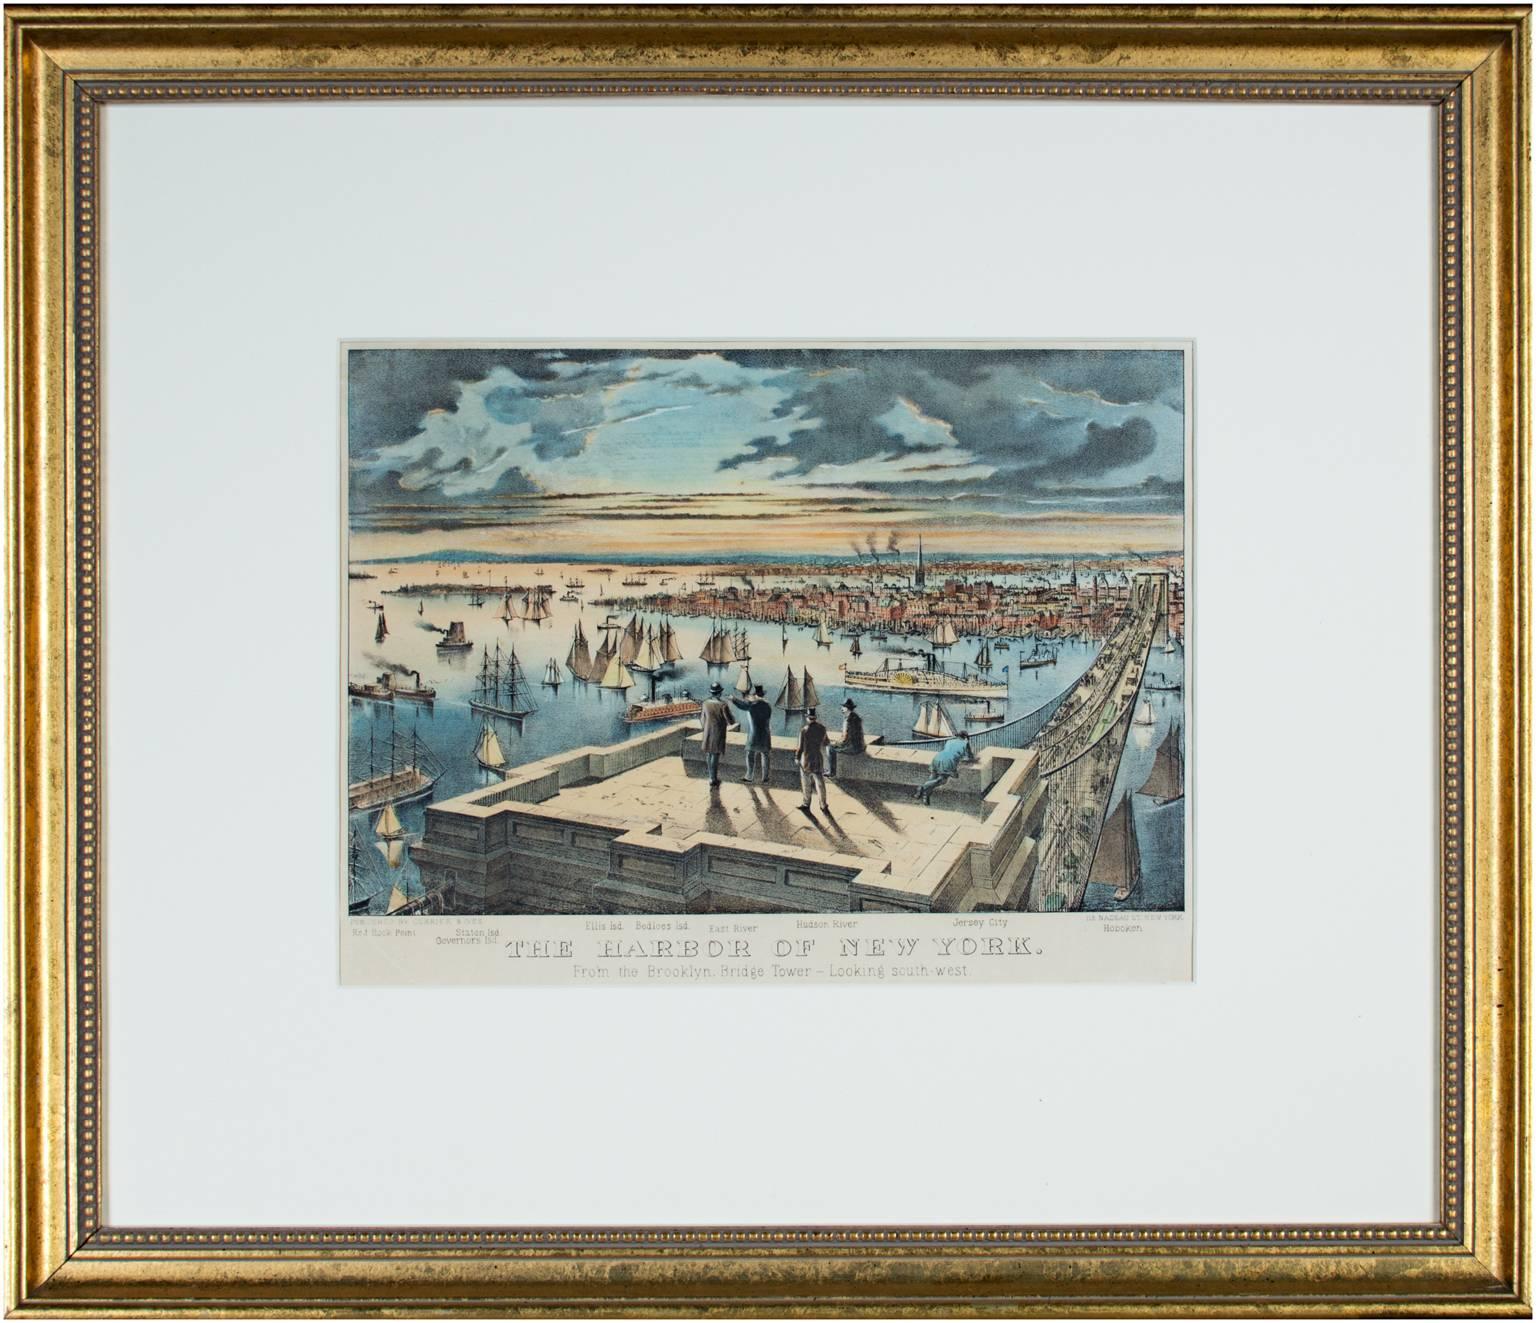 currier and ives prints